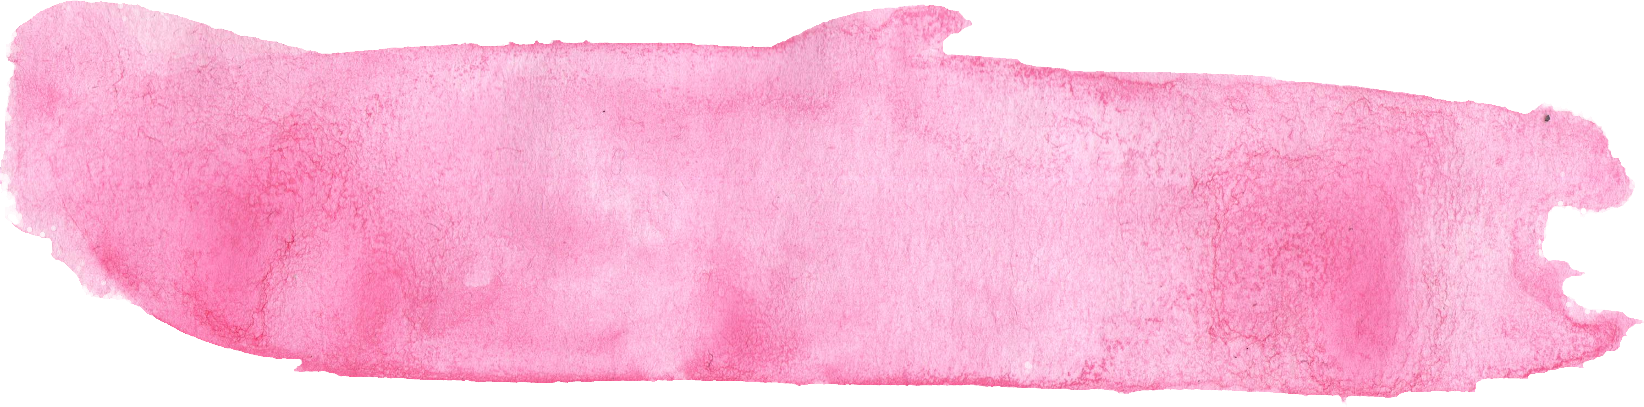 Watercolor Stain PNG Free Download